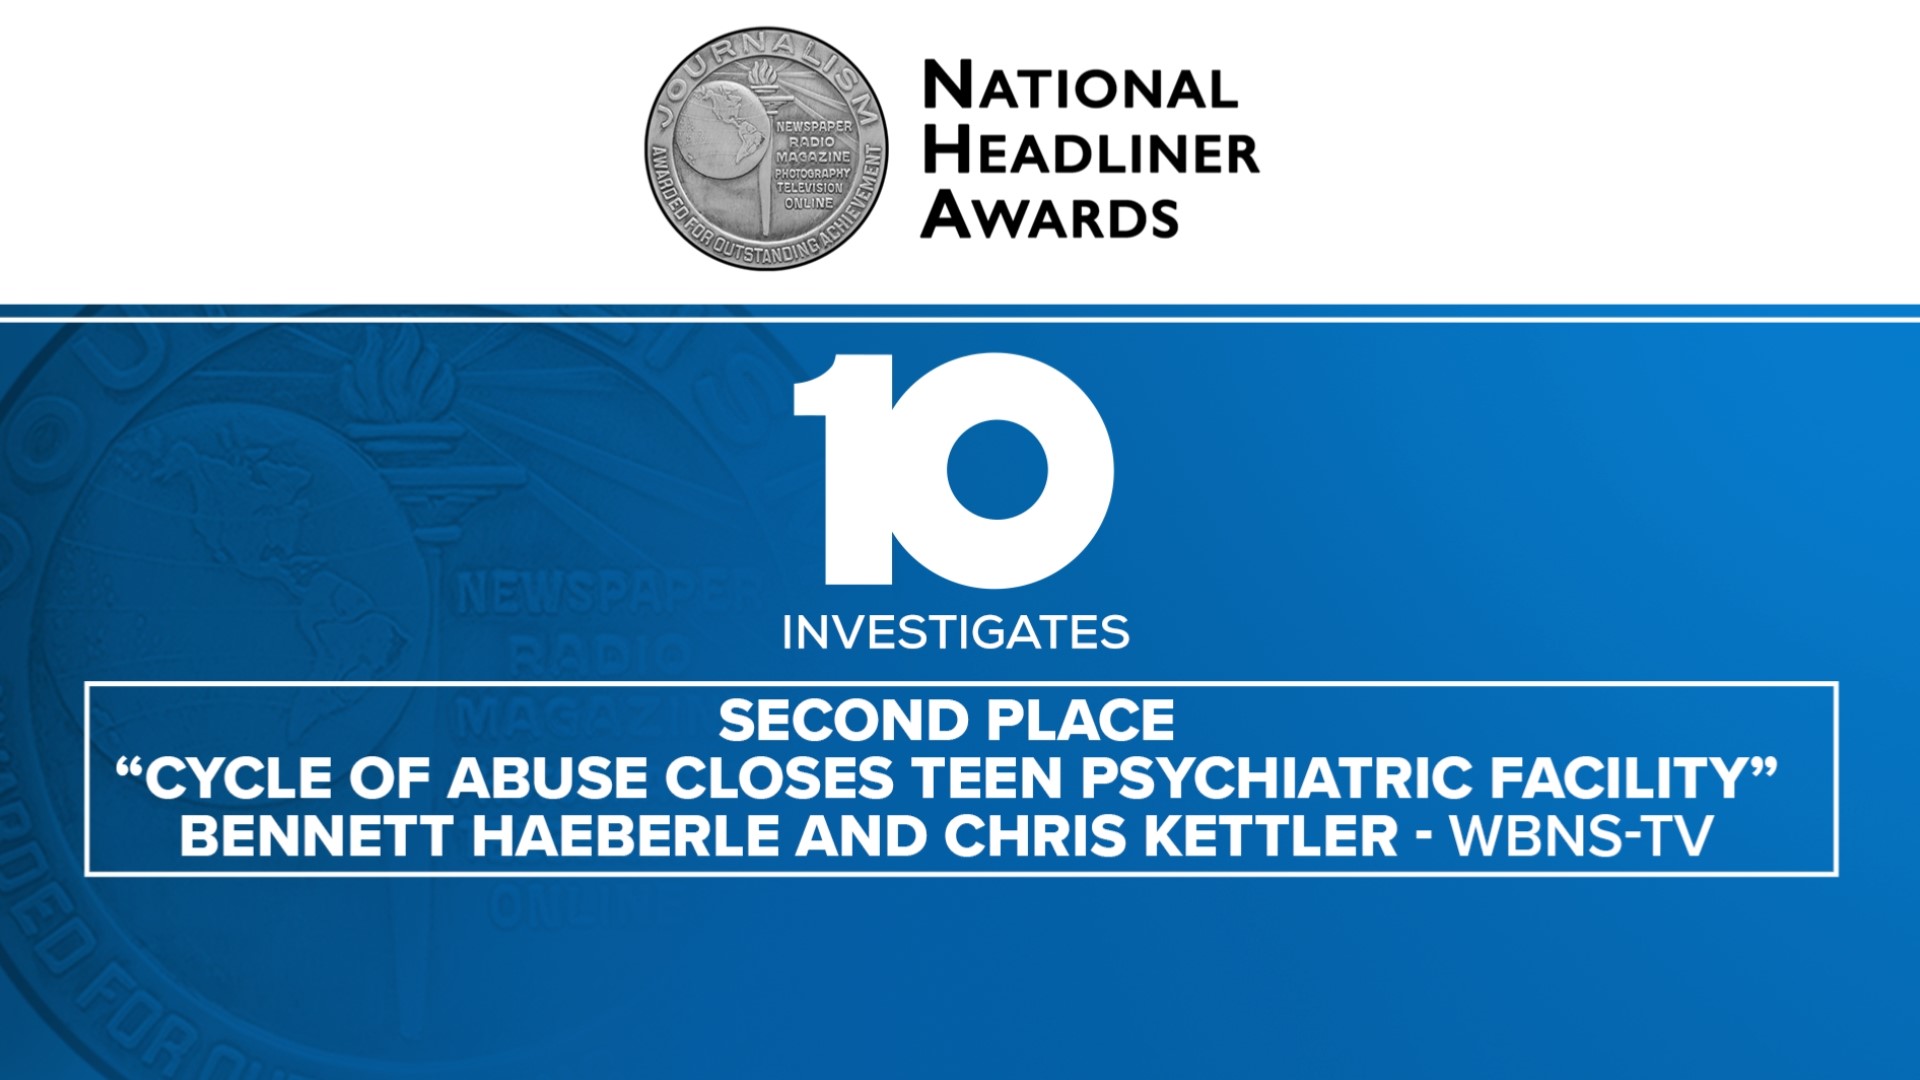 National Headliner Awards honor the best journalism in the U.S. It is one of the oldest and largest annual contests recognizing journalistic merit in the country.